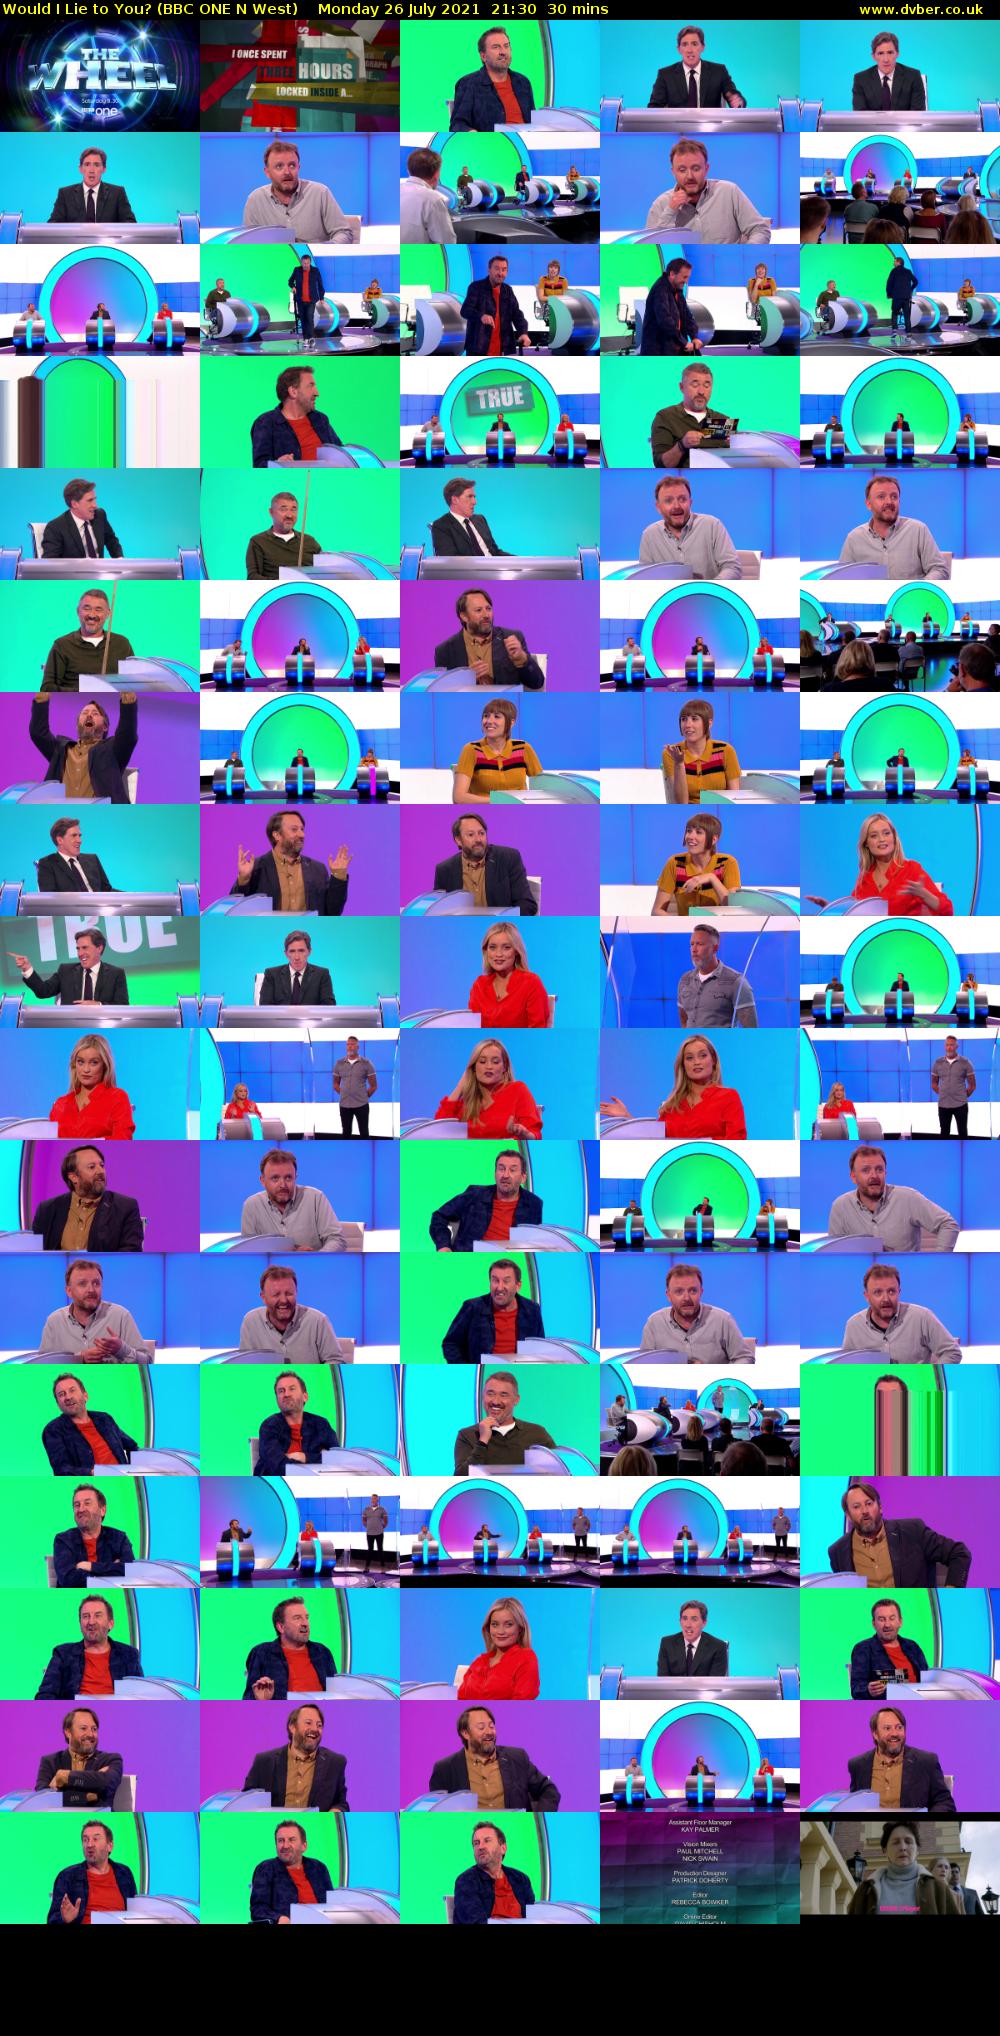 Would I Lie to You? (BBC ONE N West) Monday 26 July 2021 21:30 - 22:00